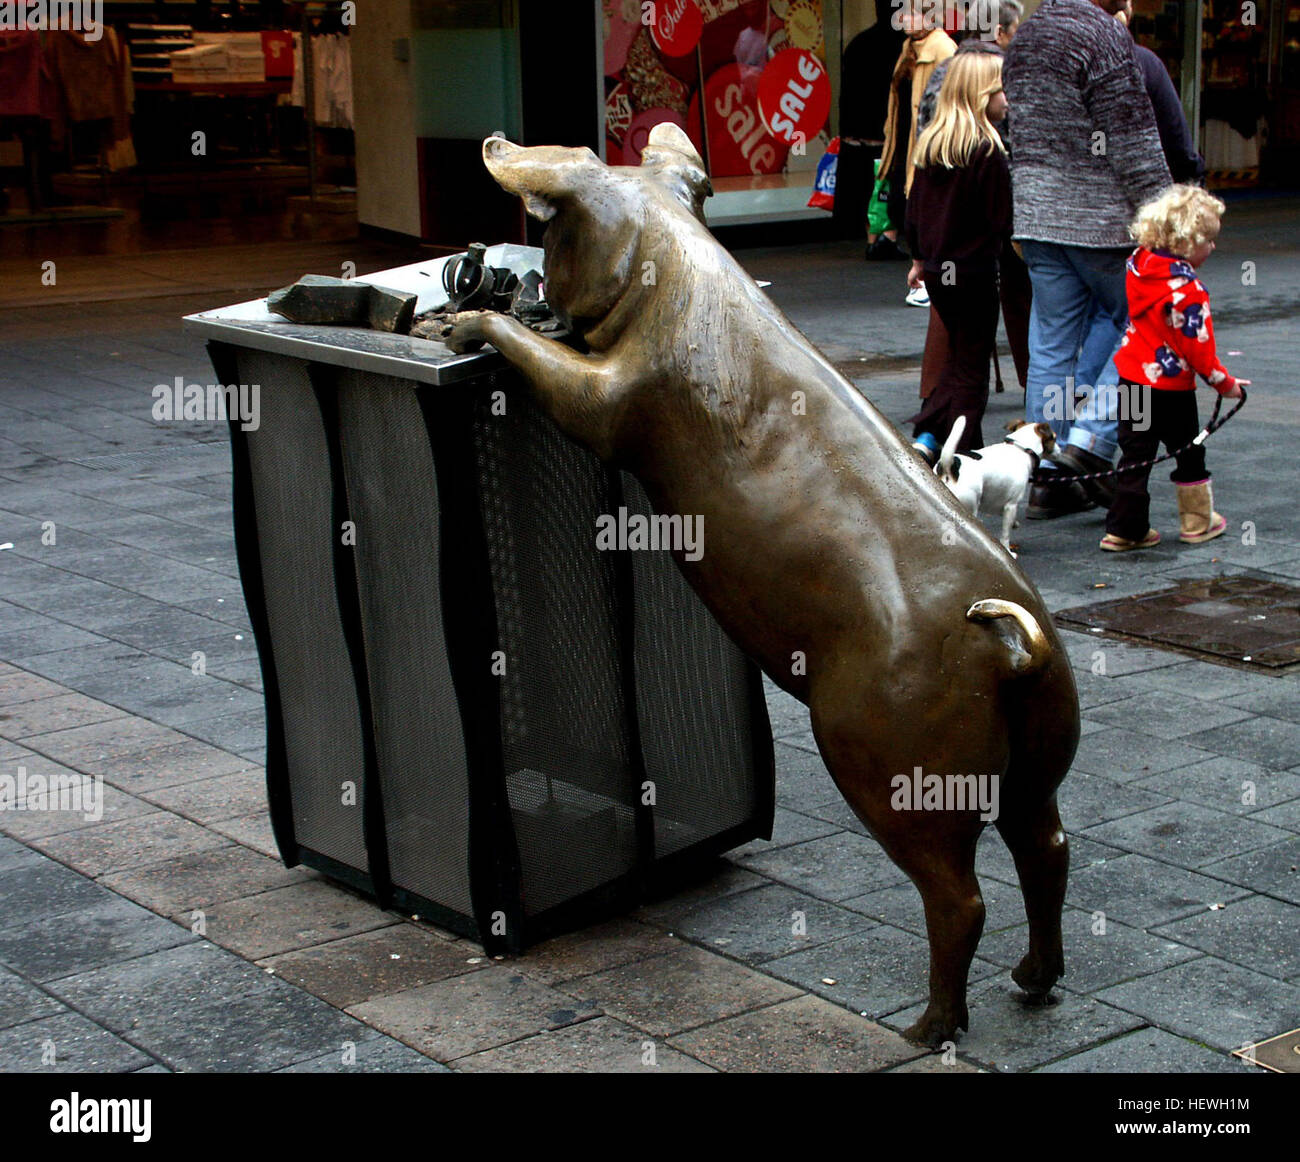 Rundle Mall is home to a bronze sculpture of a group of life-sized pigs, officially known as 'A Day Out' by Marguerite Derricourt.  The sculpture is landmark 3 on the Rundle Mall Discovery Trail.  The four pigs - Truffles (the standing pig), Horatio (the sitting pig), Oliver (the pig at the bin) and Augusta (the trotting pig) - are depicted in lively poses as if they were walking the street, greeting shoppers, and sniffing out a bargain.   They were commissioned by the Adelaide City Council as part of the final phase of the last upgrade of Rundle Mall. Stock Photo